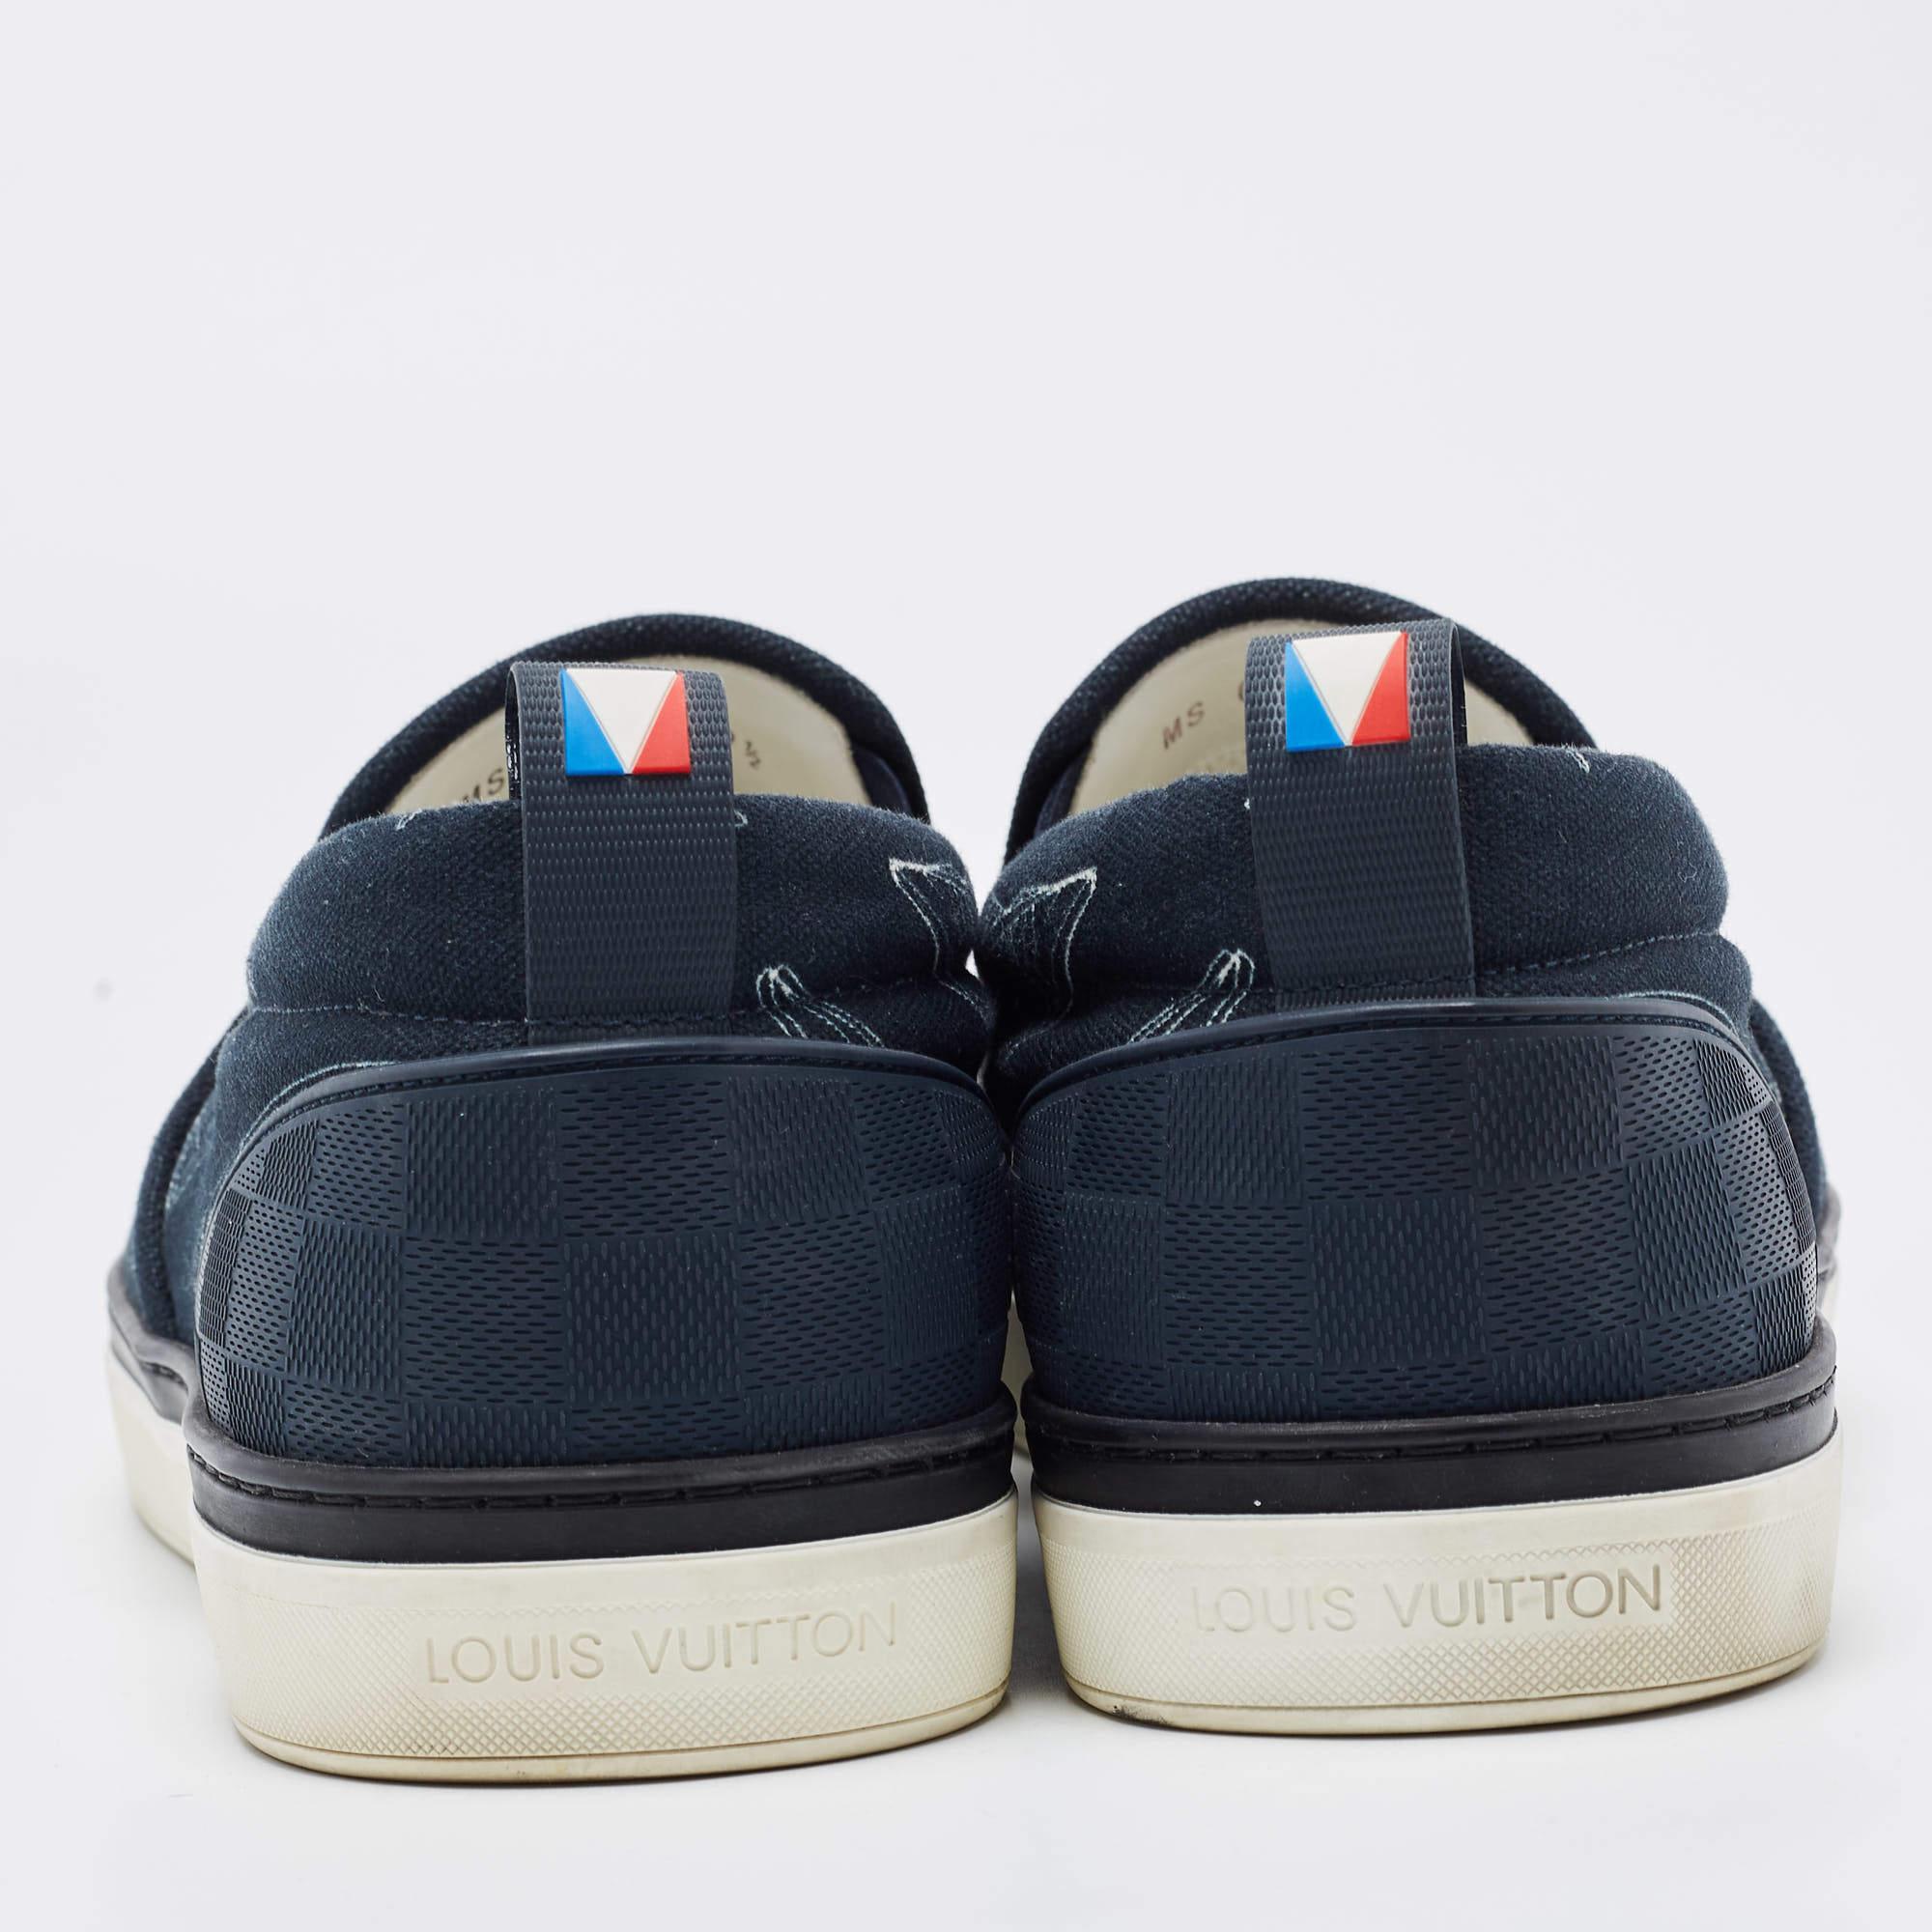 Louis Vuitton Navy Blue Canvas Victory Boats Slip On Sneakers Size 43.5 4